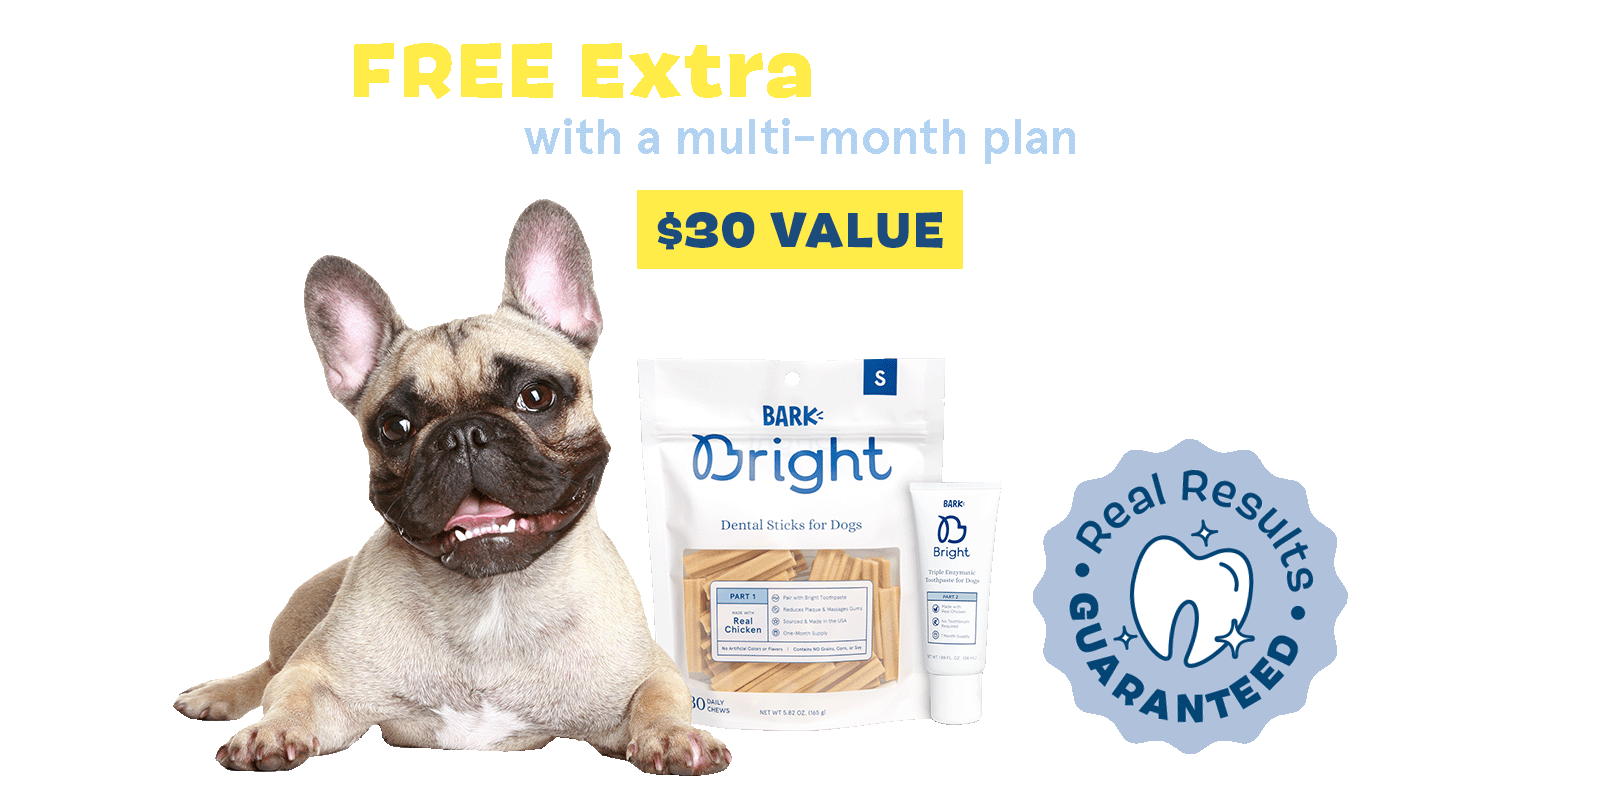 FREE Extra Bright Kit with a multi-month plan - $30 value - Dental chews + toothpaste!